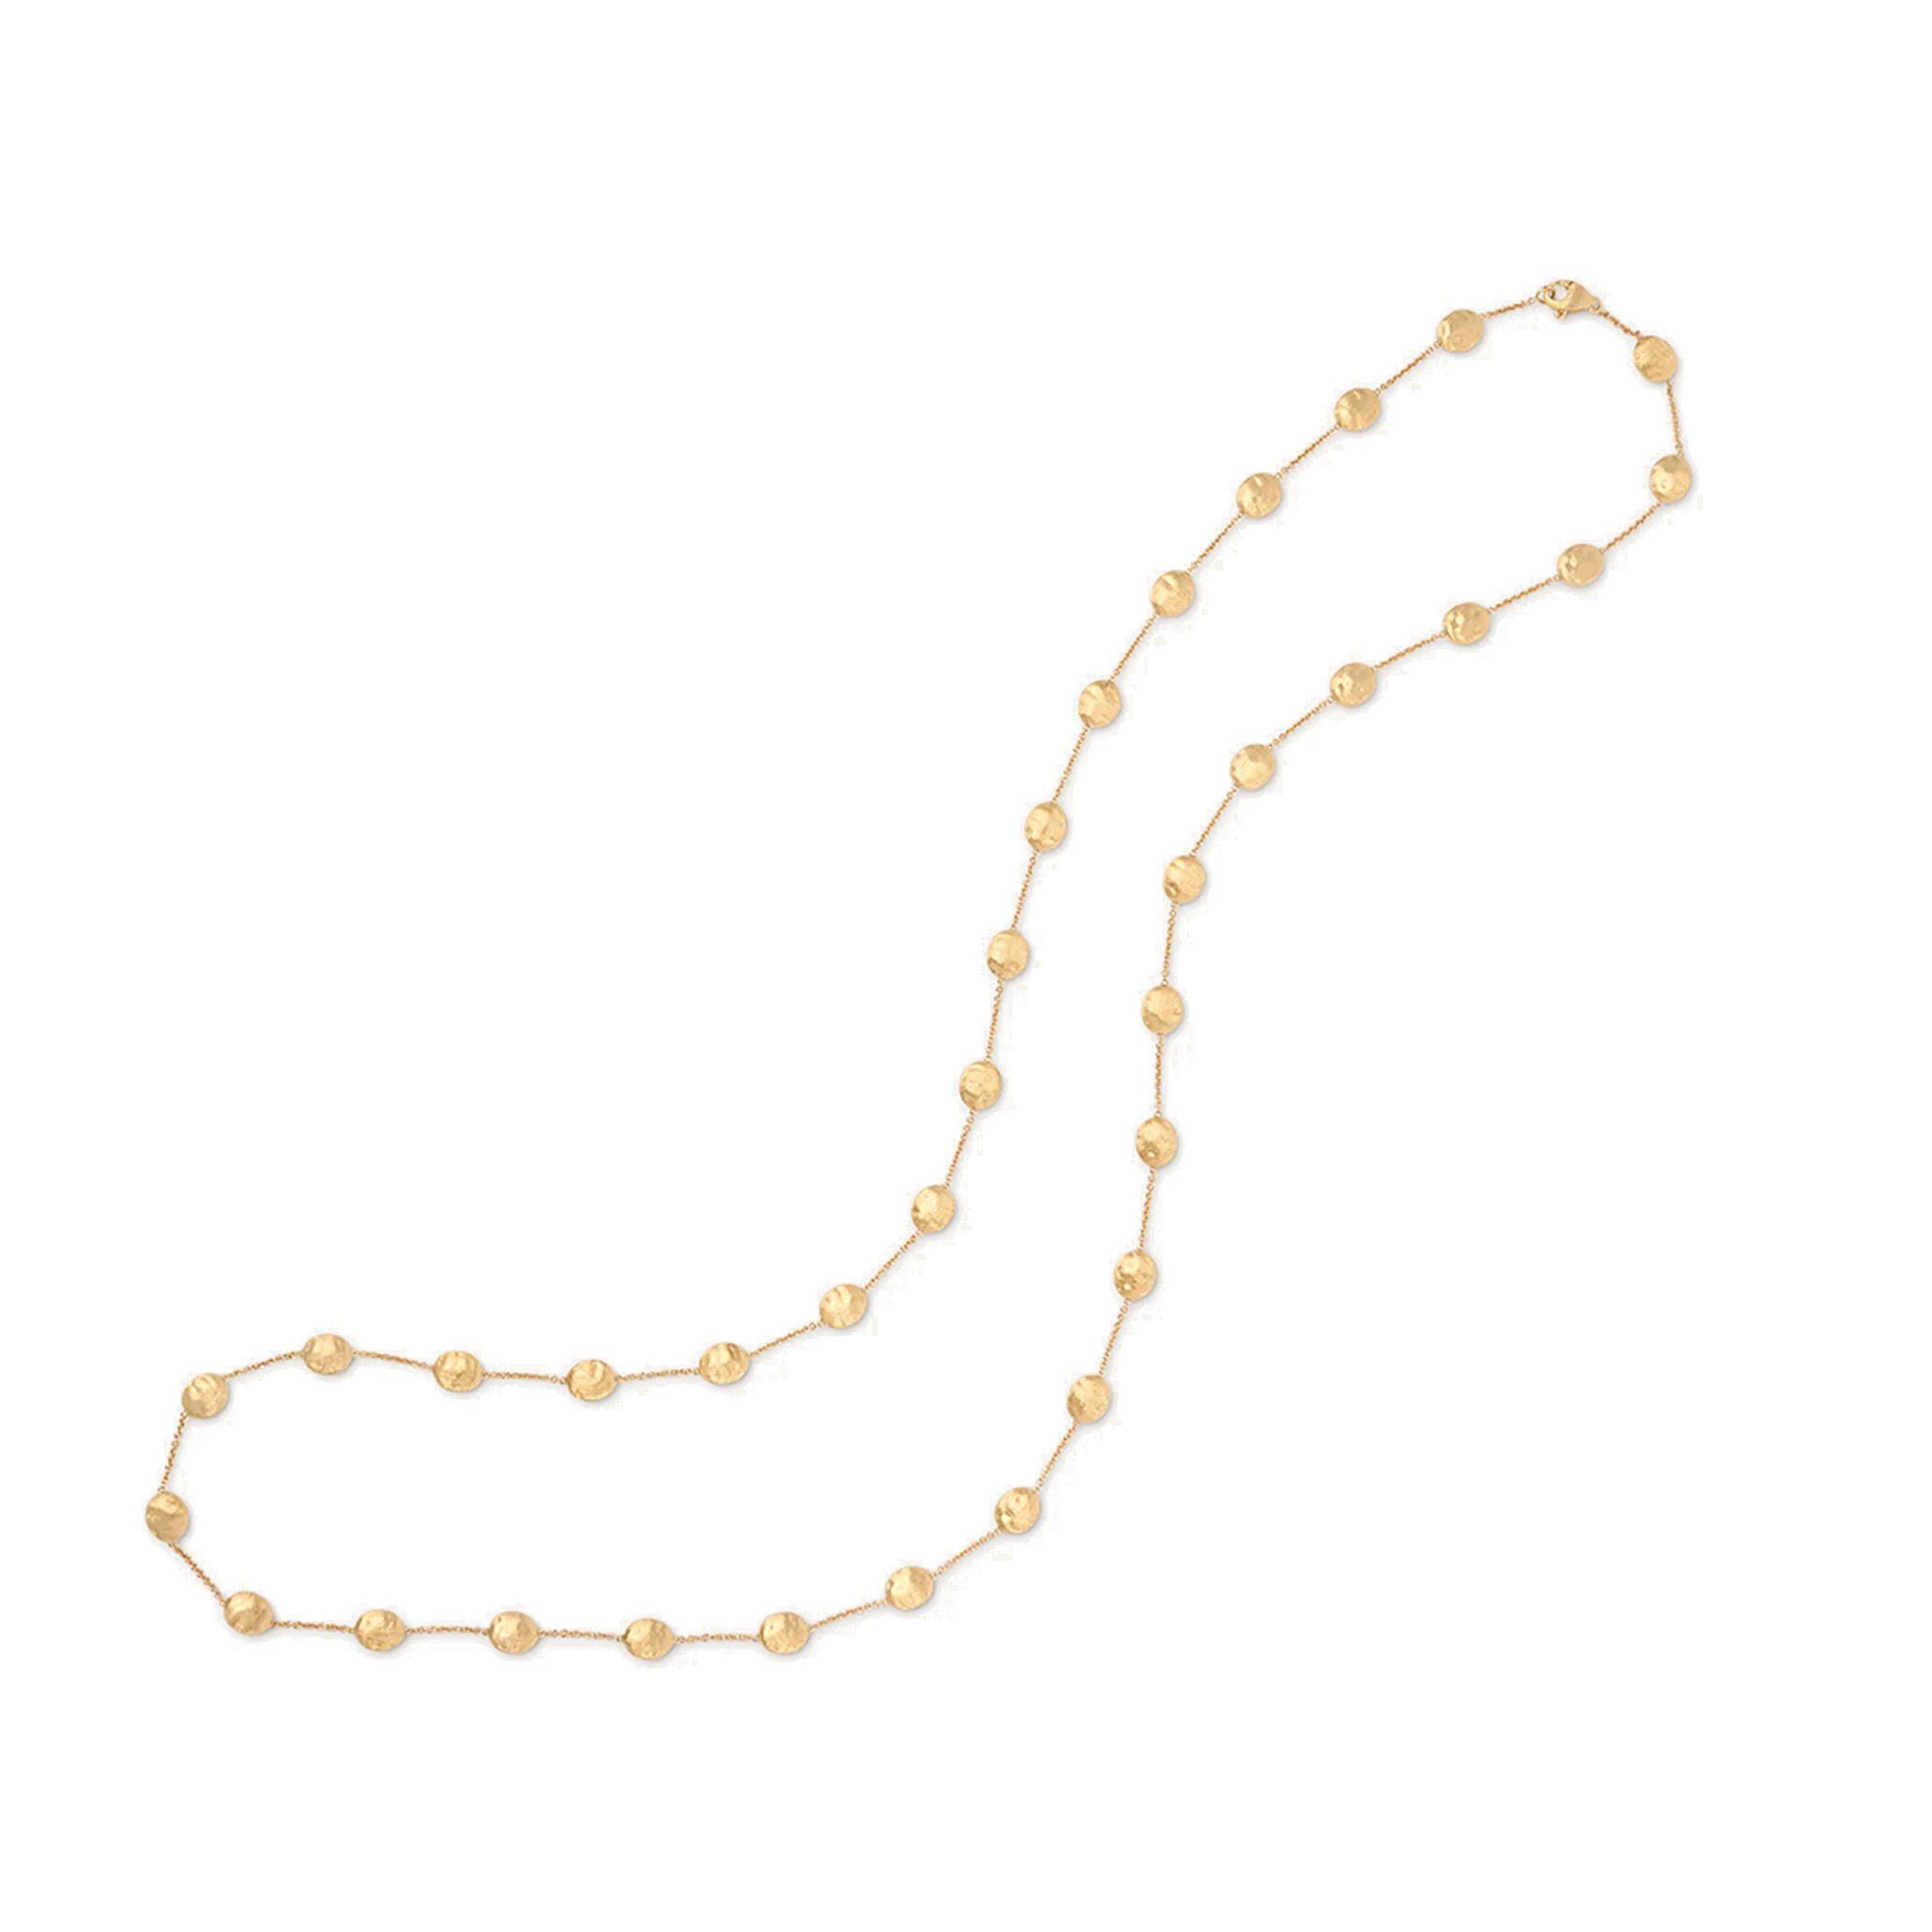 Marco Bicego Siviglia Large Bean Station Necklace, 36 inches 1